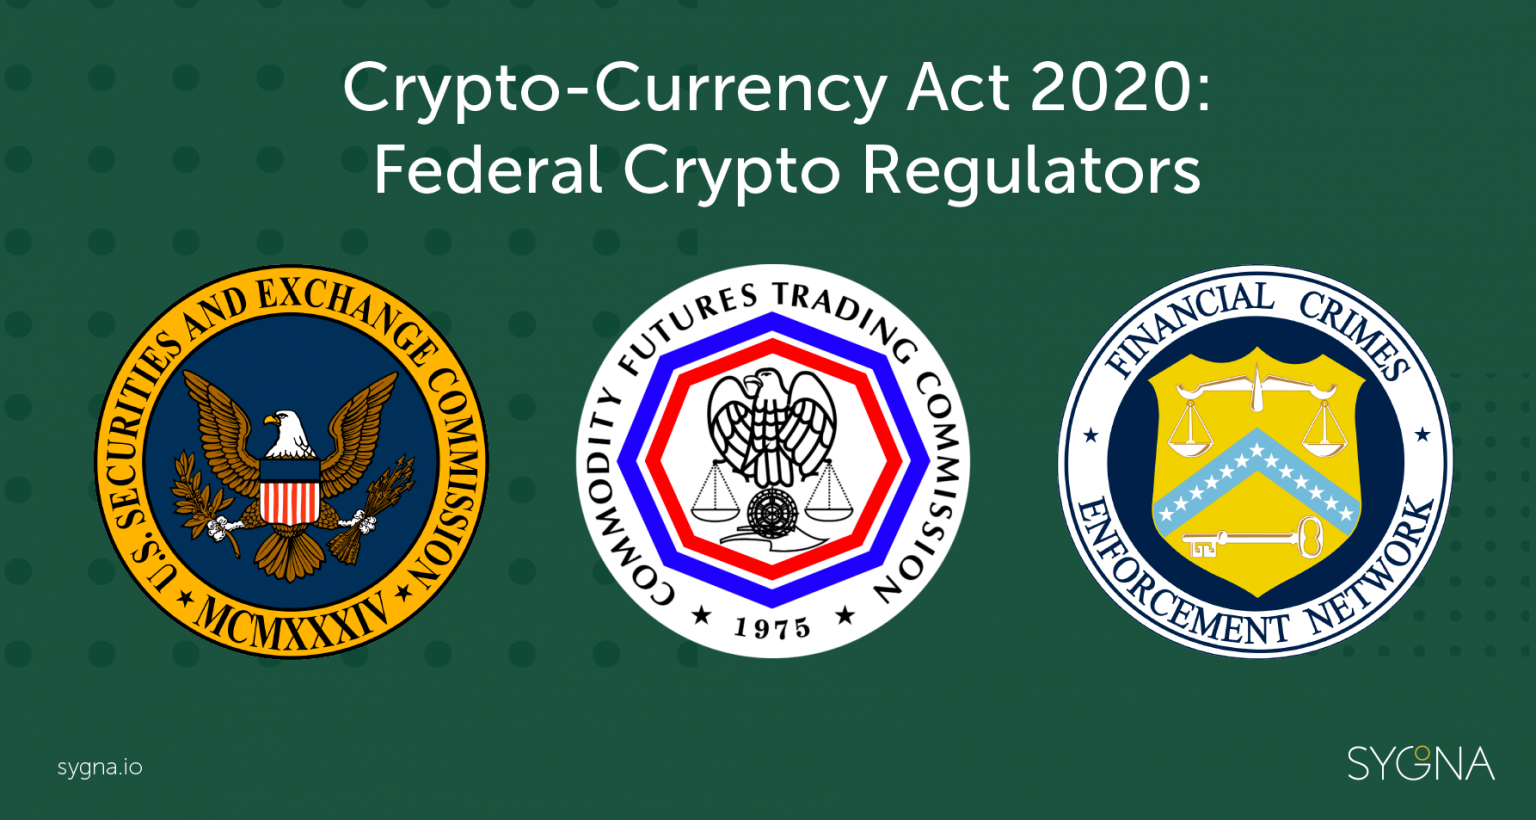 What is the Crypto-Currency Act of 2020? - Sygna